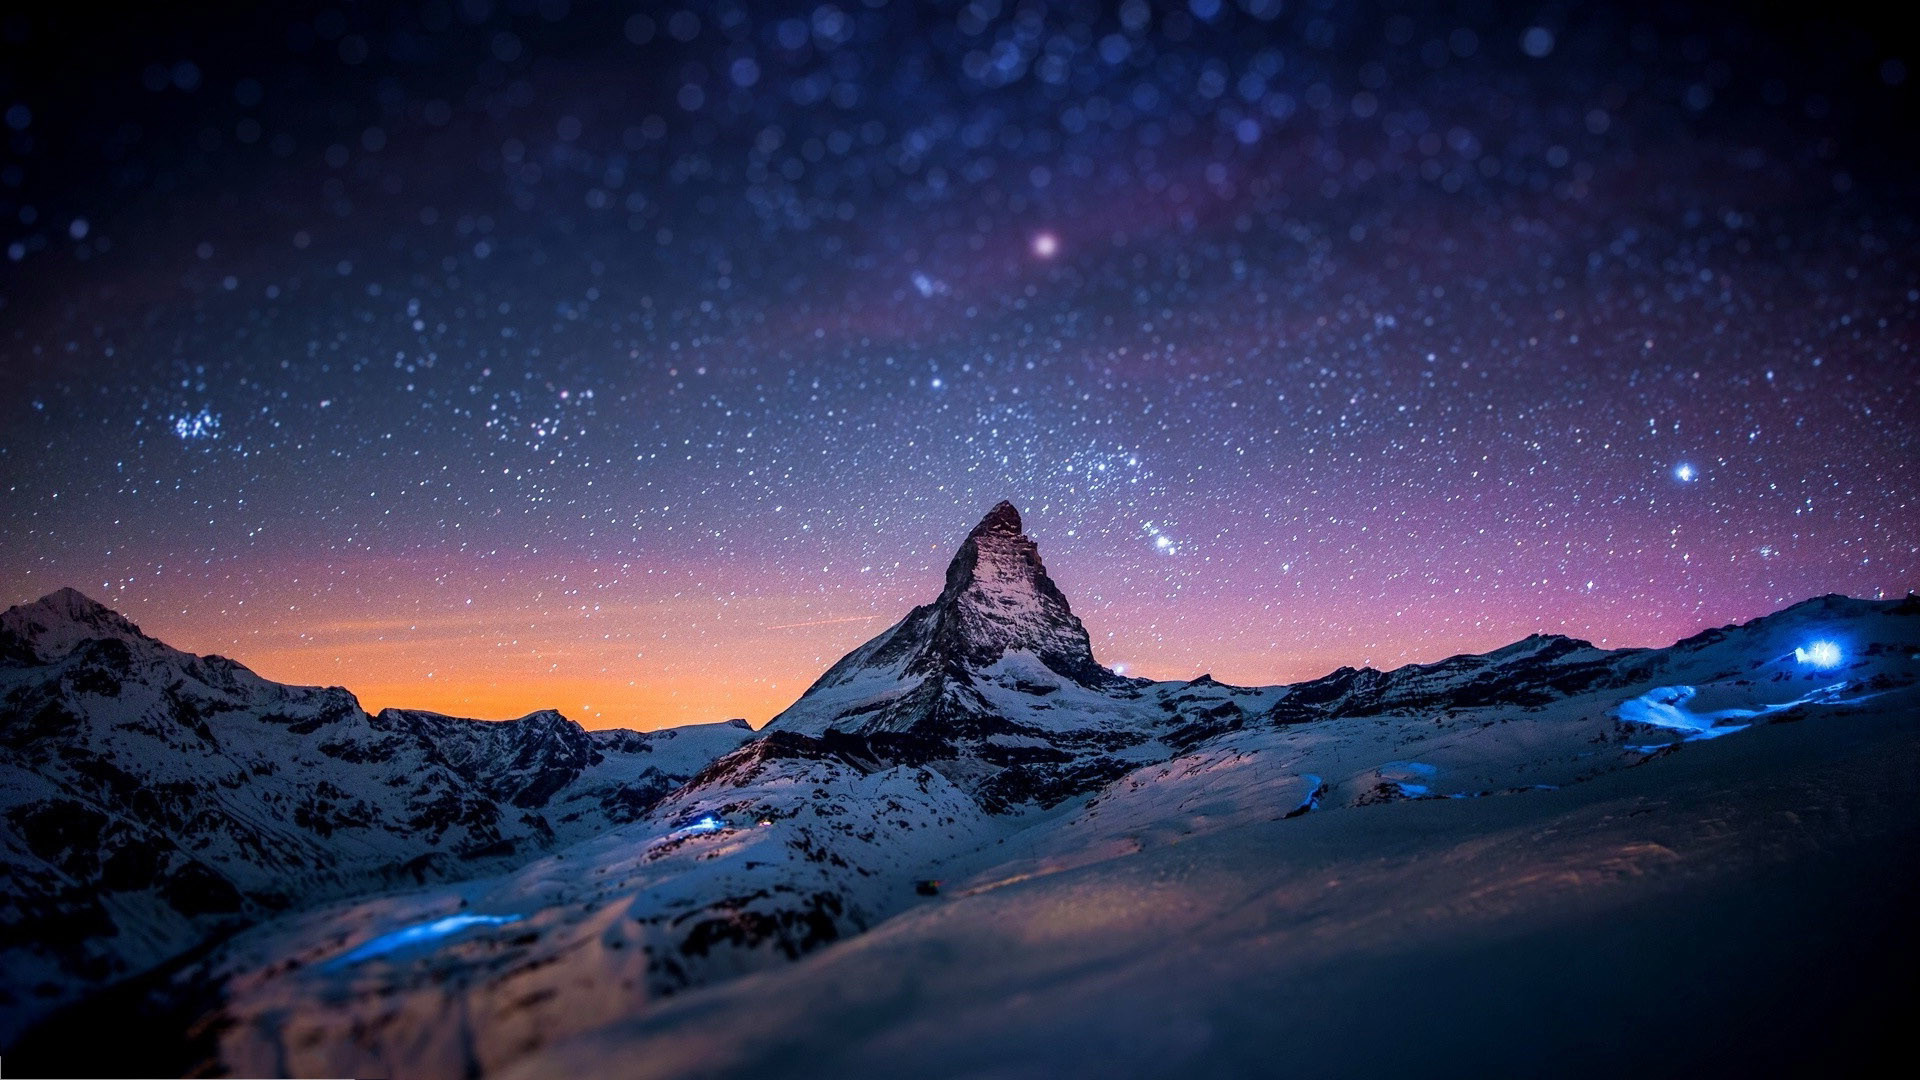 Mountain Night Wallpaper Images Peaceful Hd Practical